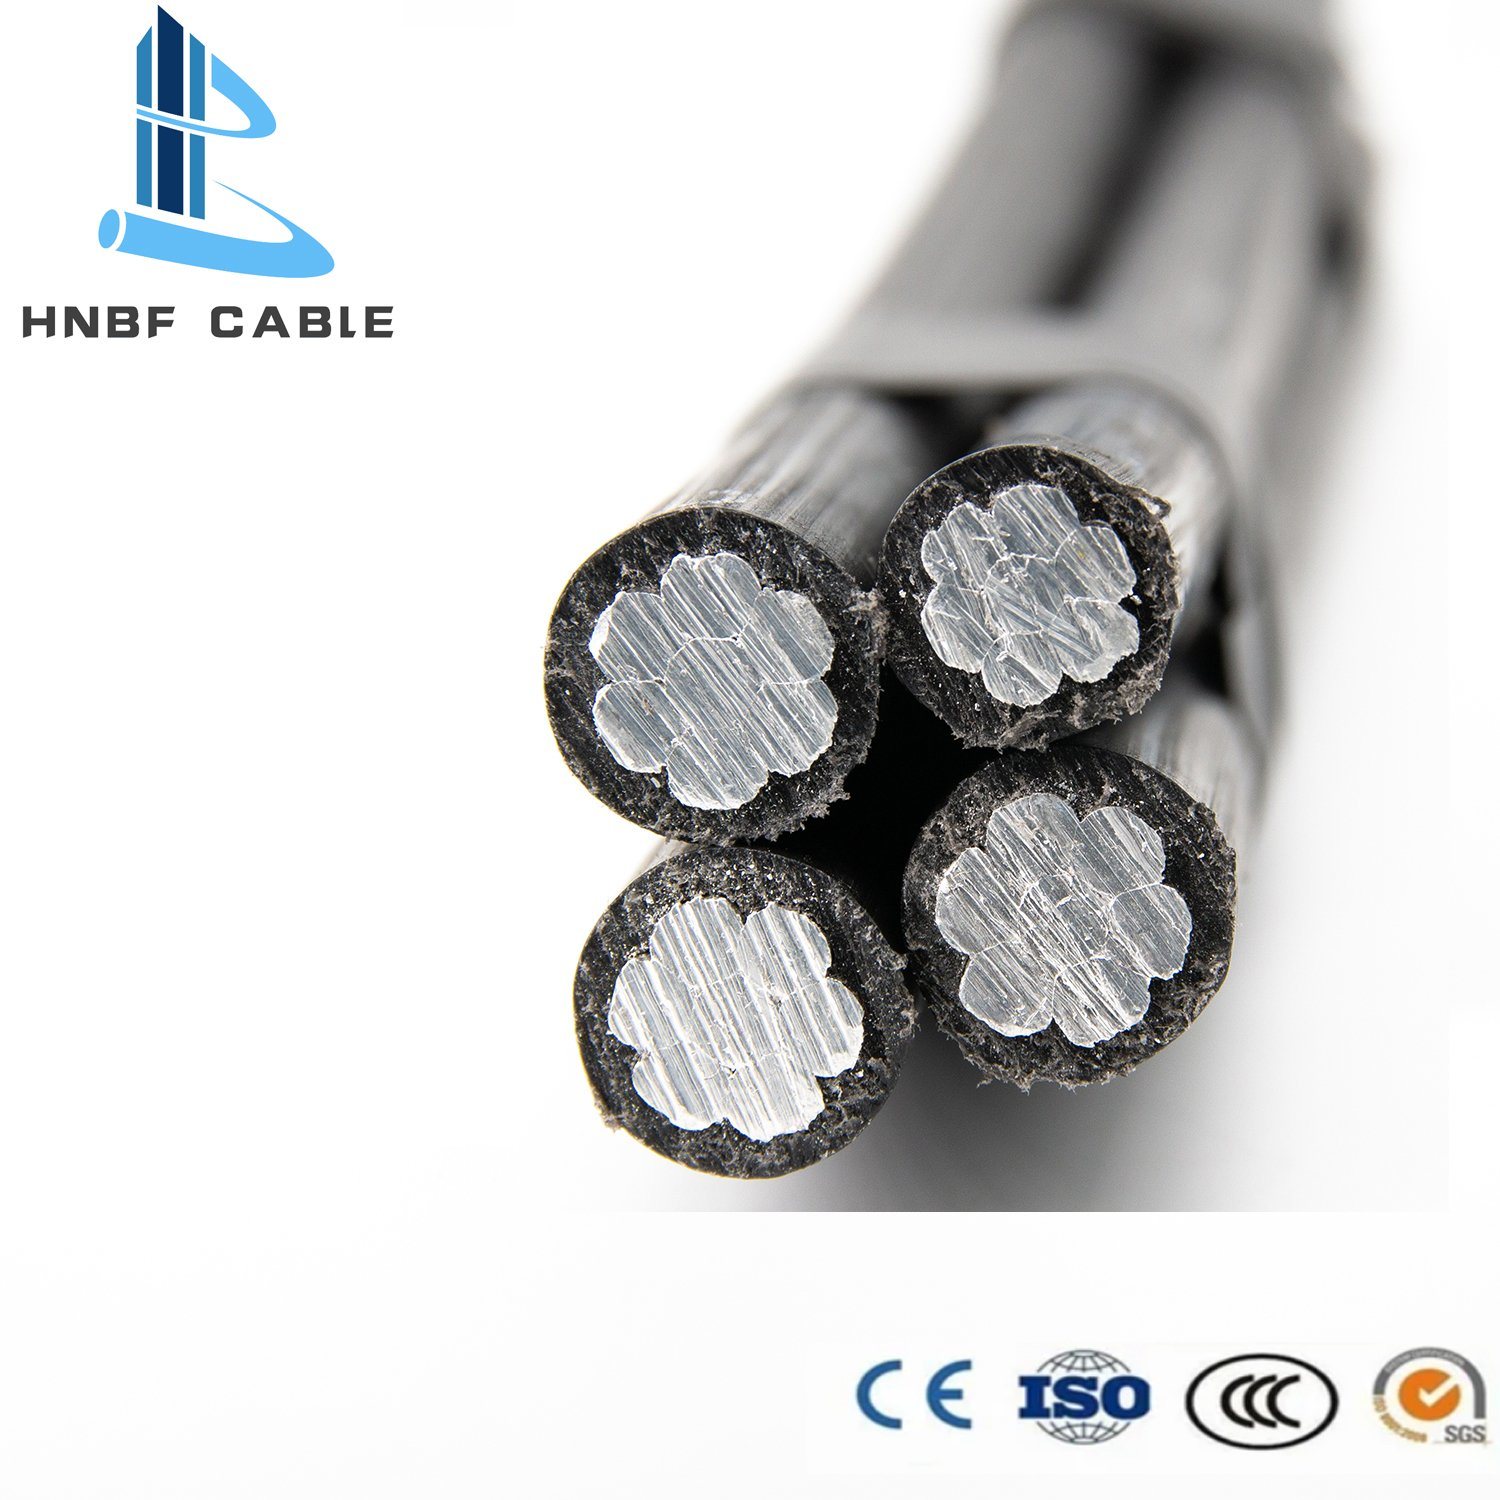 LV ACSR/AAAC Conductor XLPE Covered Aerial Bundled ABC Cable 477 Kcmil for Overhead Transmission Line